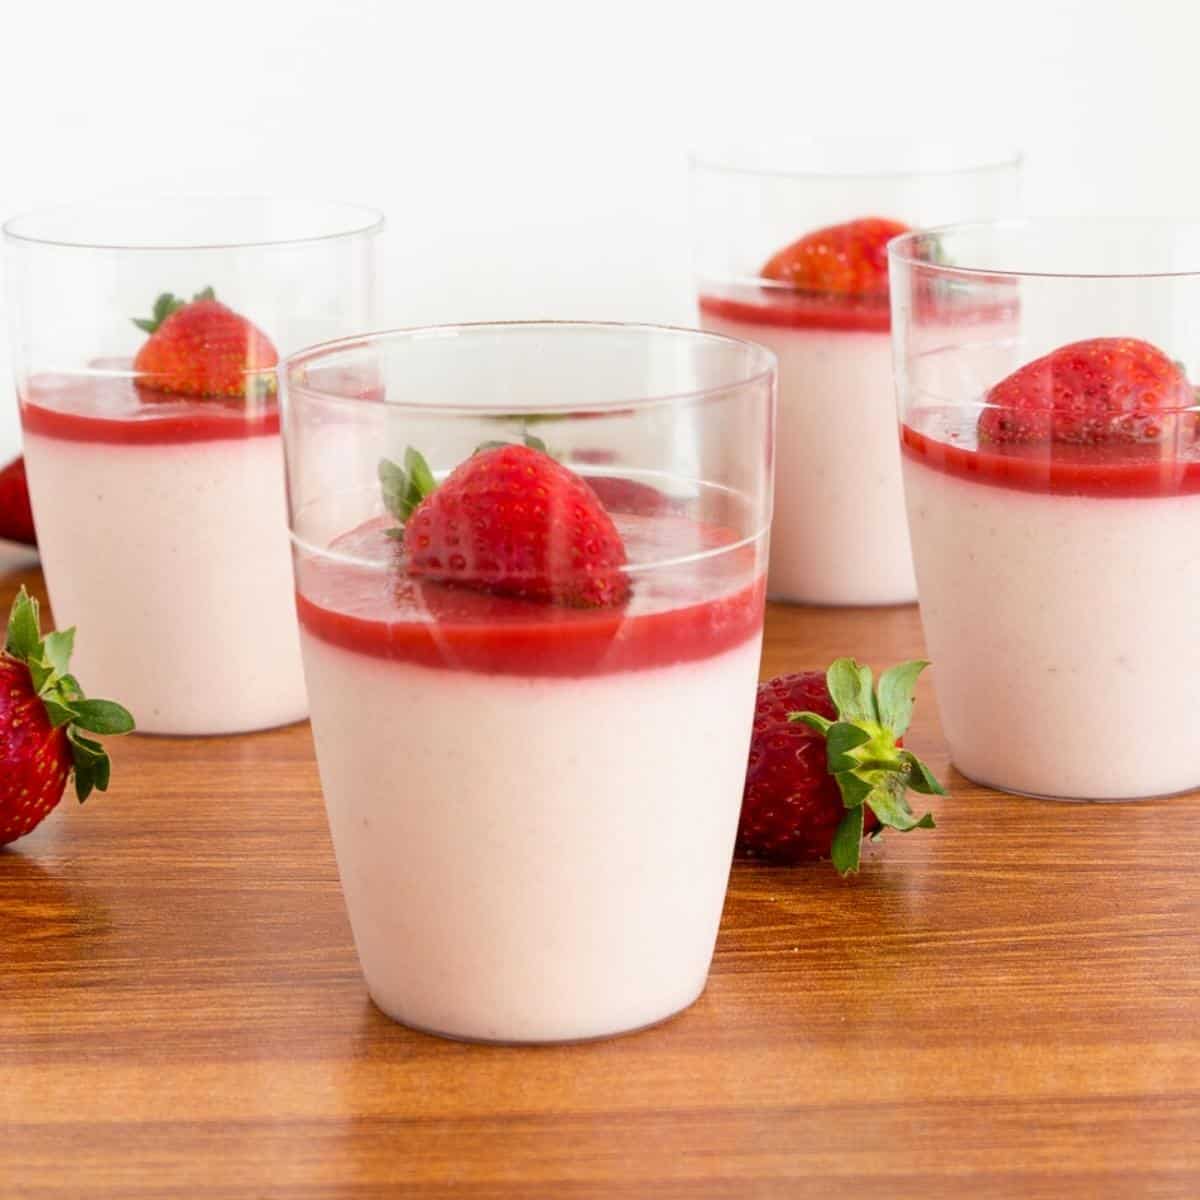 Desserts cups with panna cotta and strawberries.